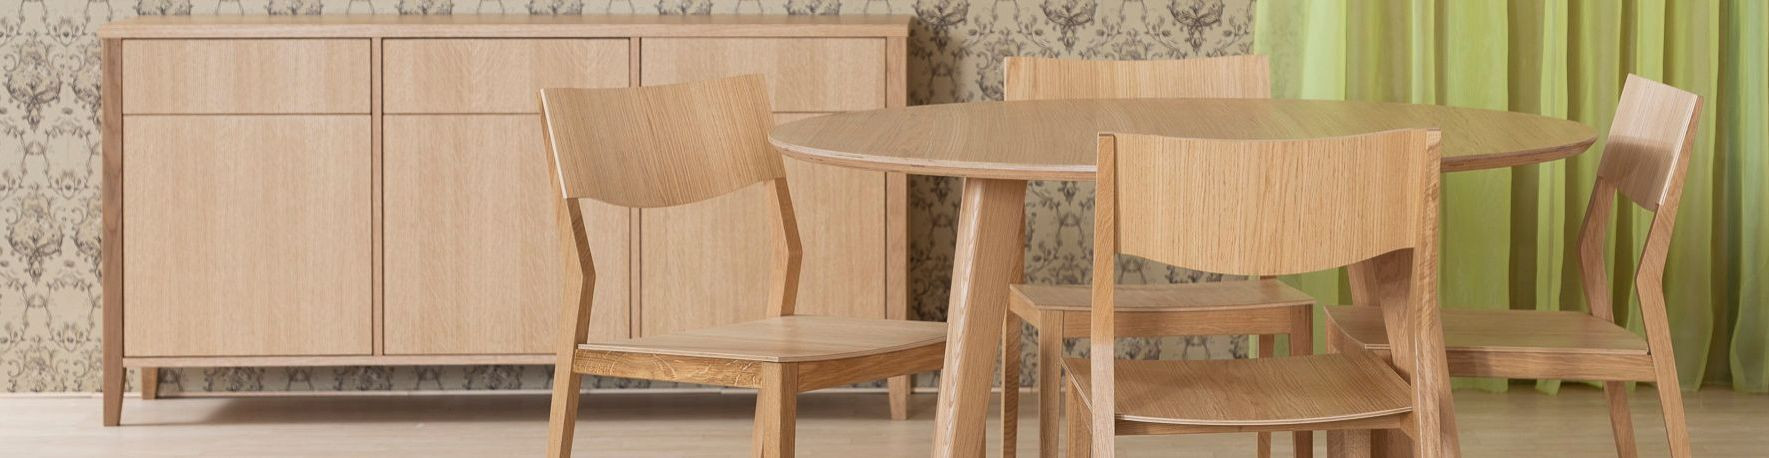 Over 30 years of experience in the field of wood furniture